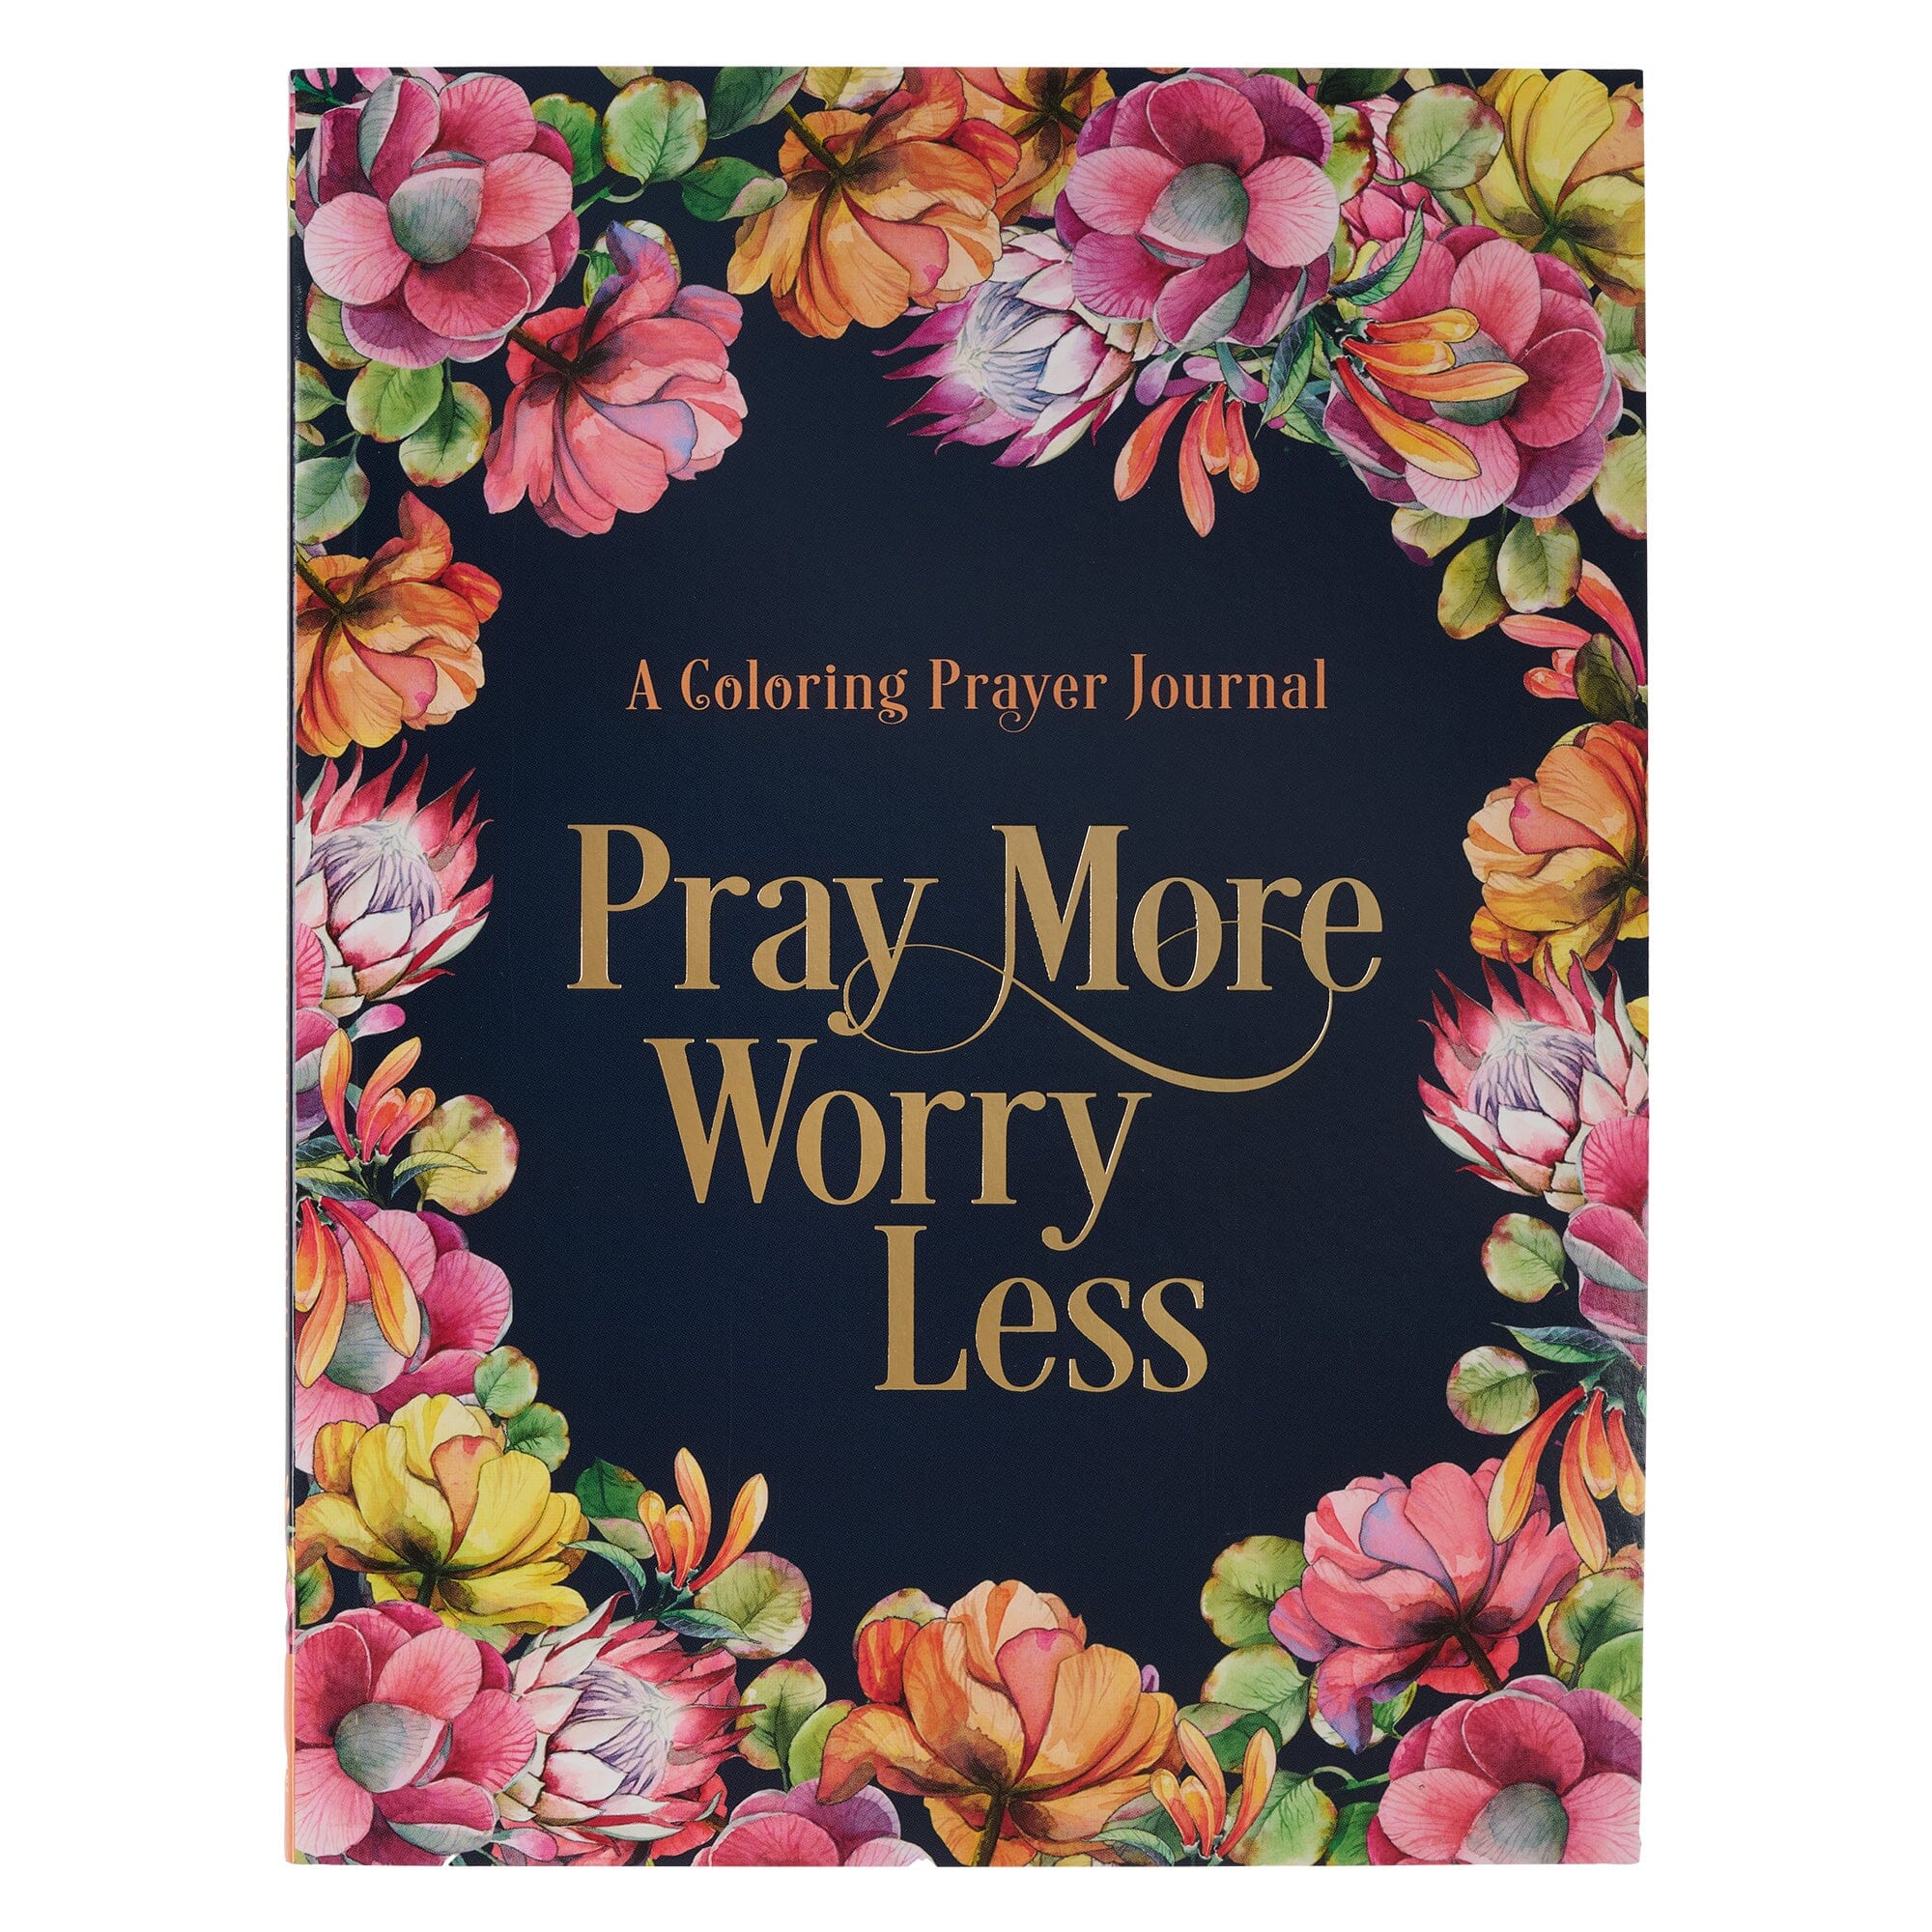 Pray More, Worry Less Coloring Book Prayer Journal  by Christian Art Gifts